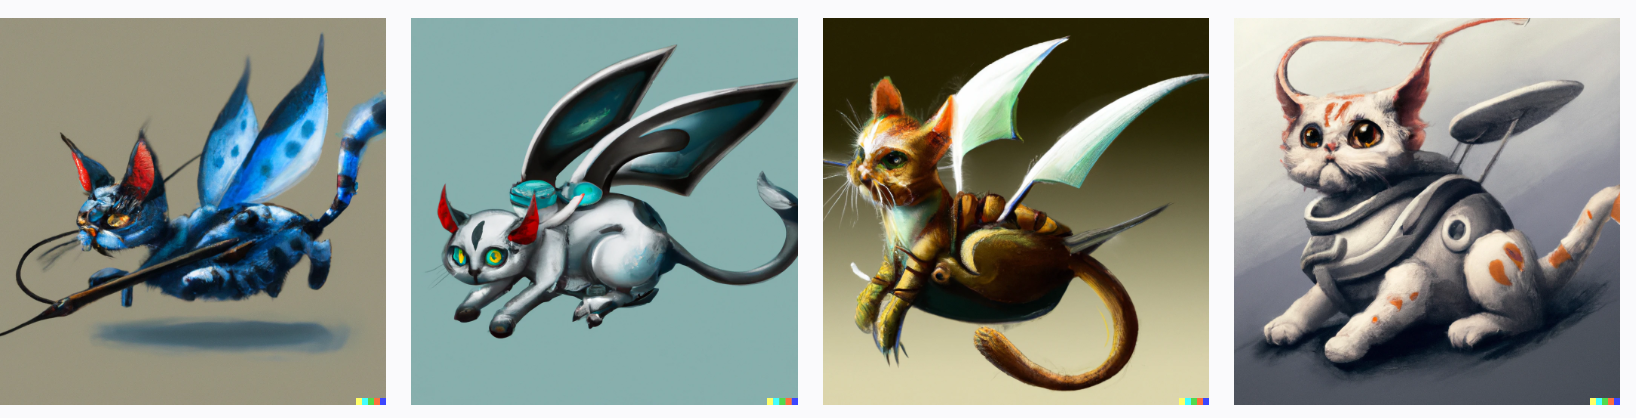 Helicopter cat chimera with big eyes that spins its tail like a propelling, digital art